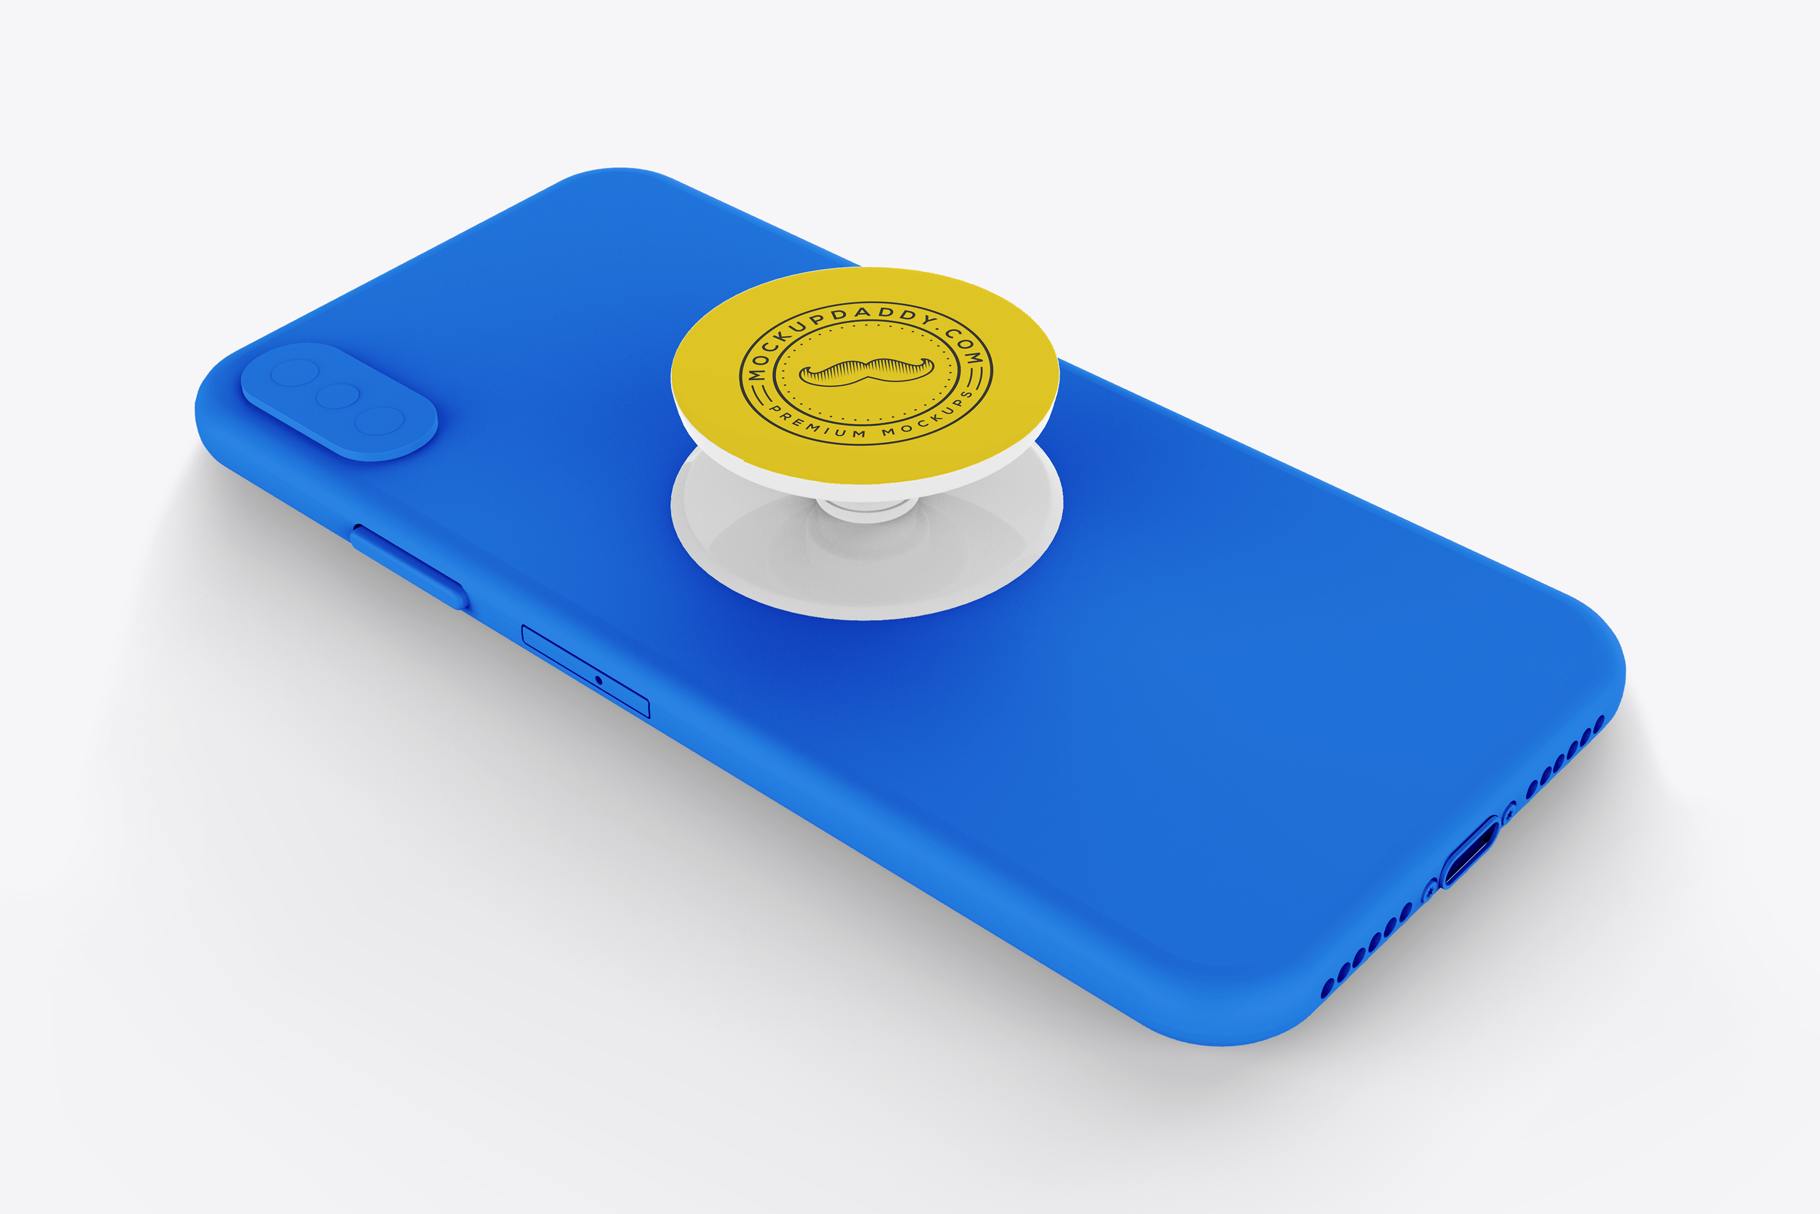 Popsocket Free Mockup / Free Whisky Bottle Mockup PSD Template : Very simple edit with smart layers.